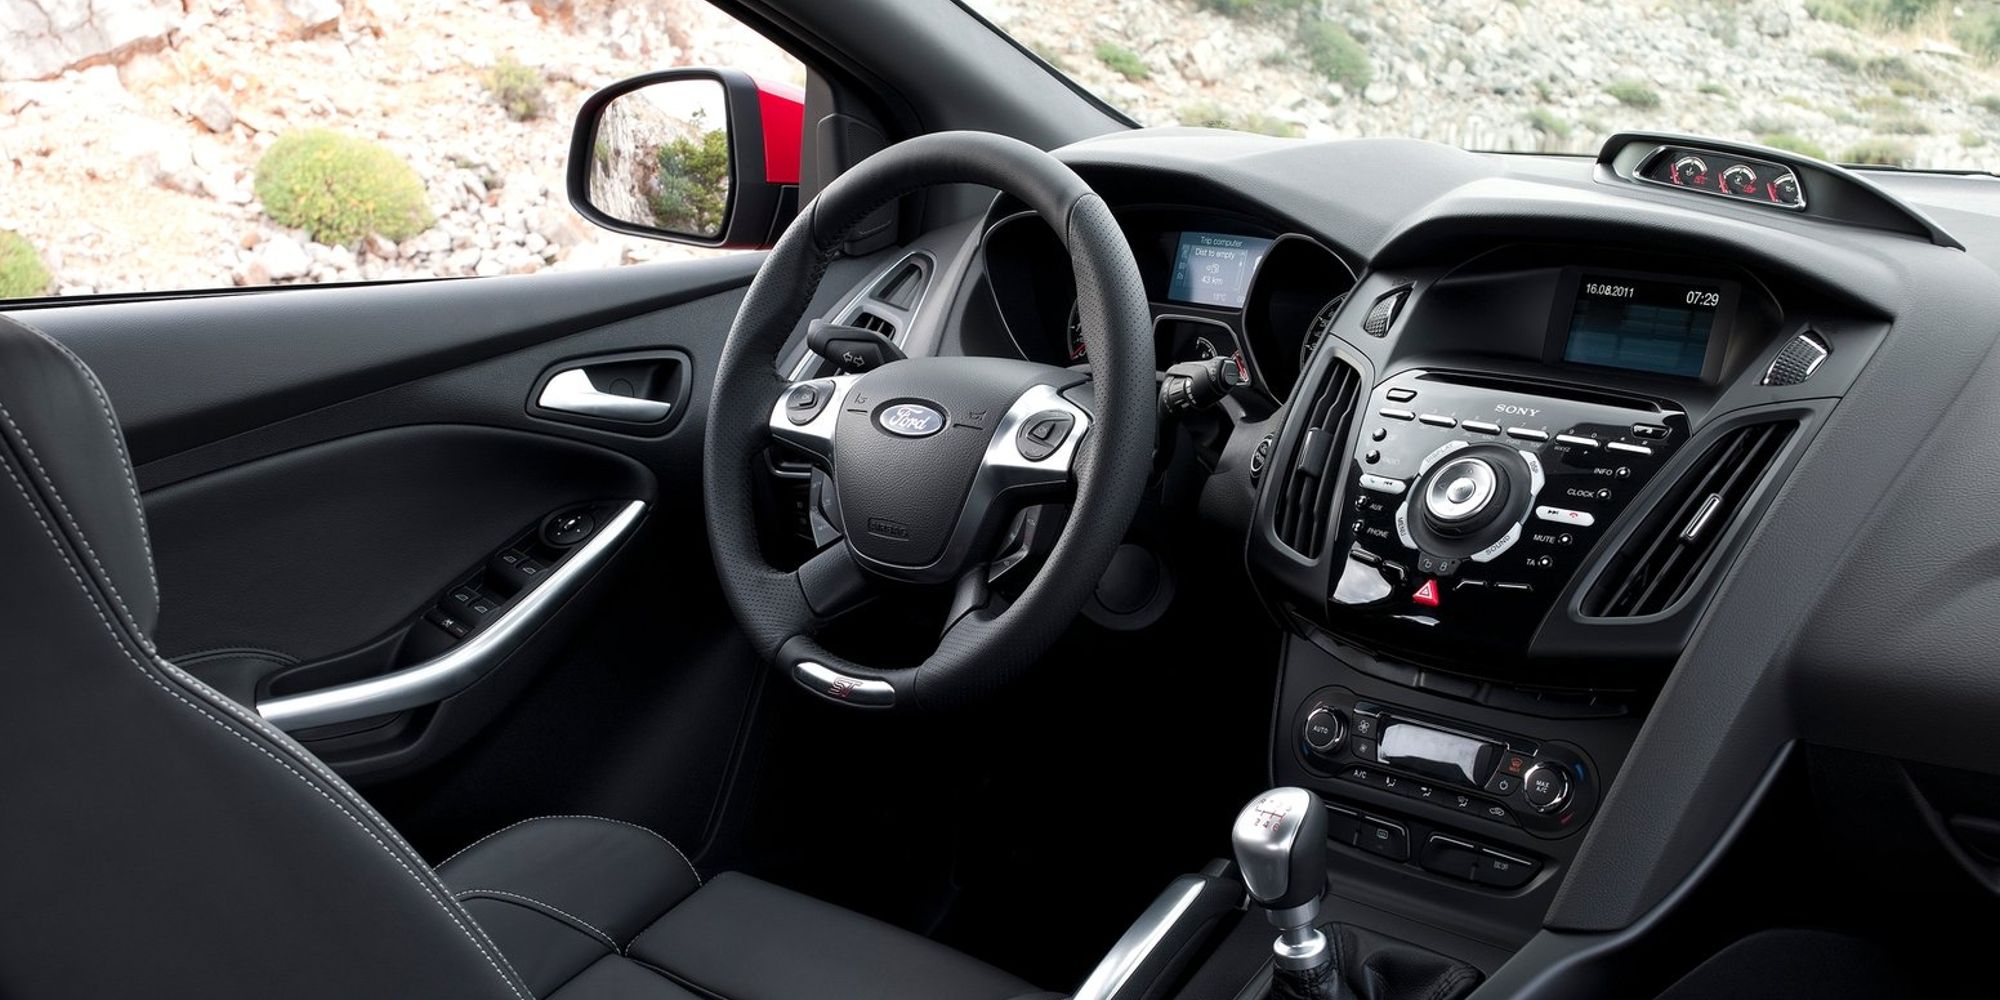 The interior of the Focus ST (pre-facelift)